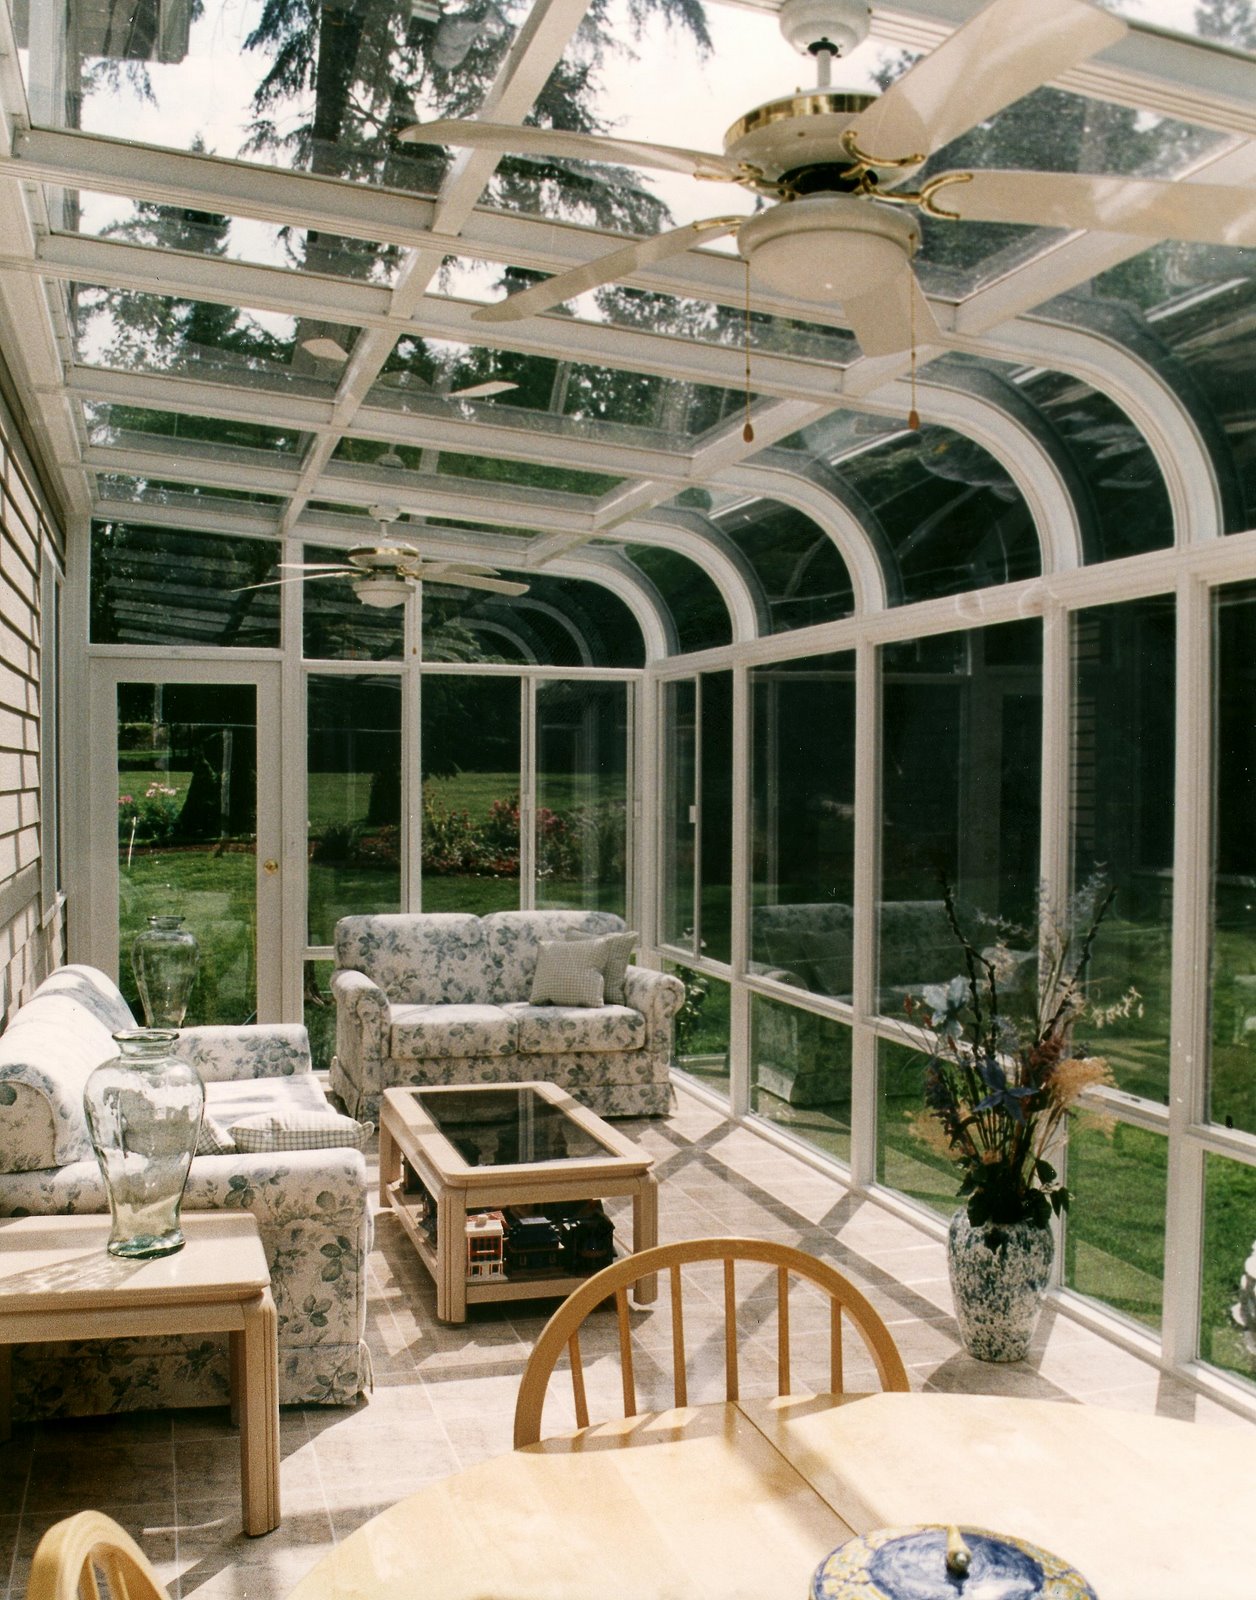 Sunroom with glass roof and glass walls